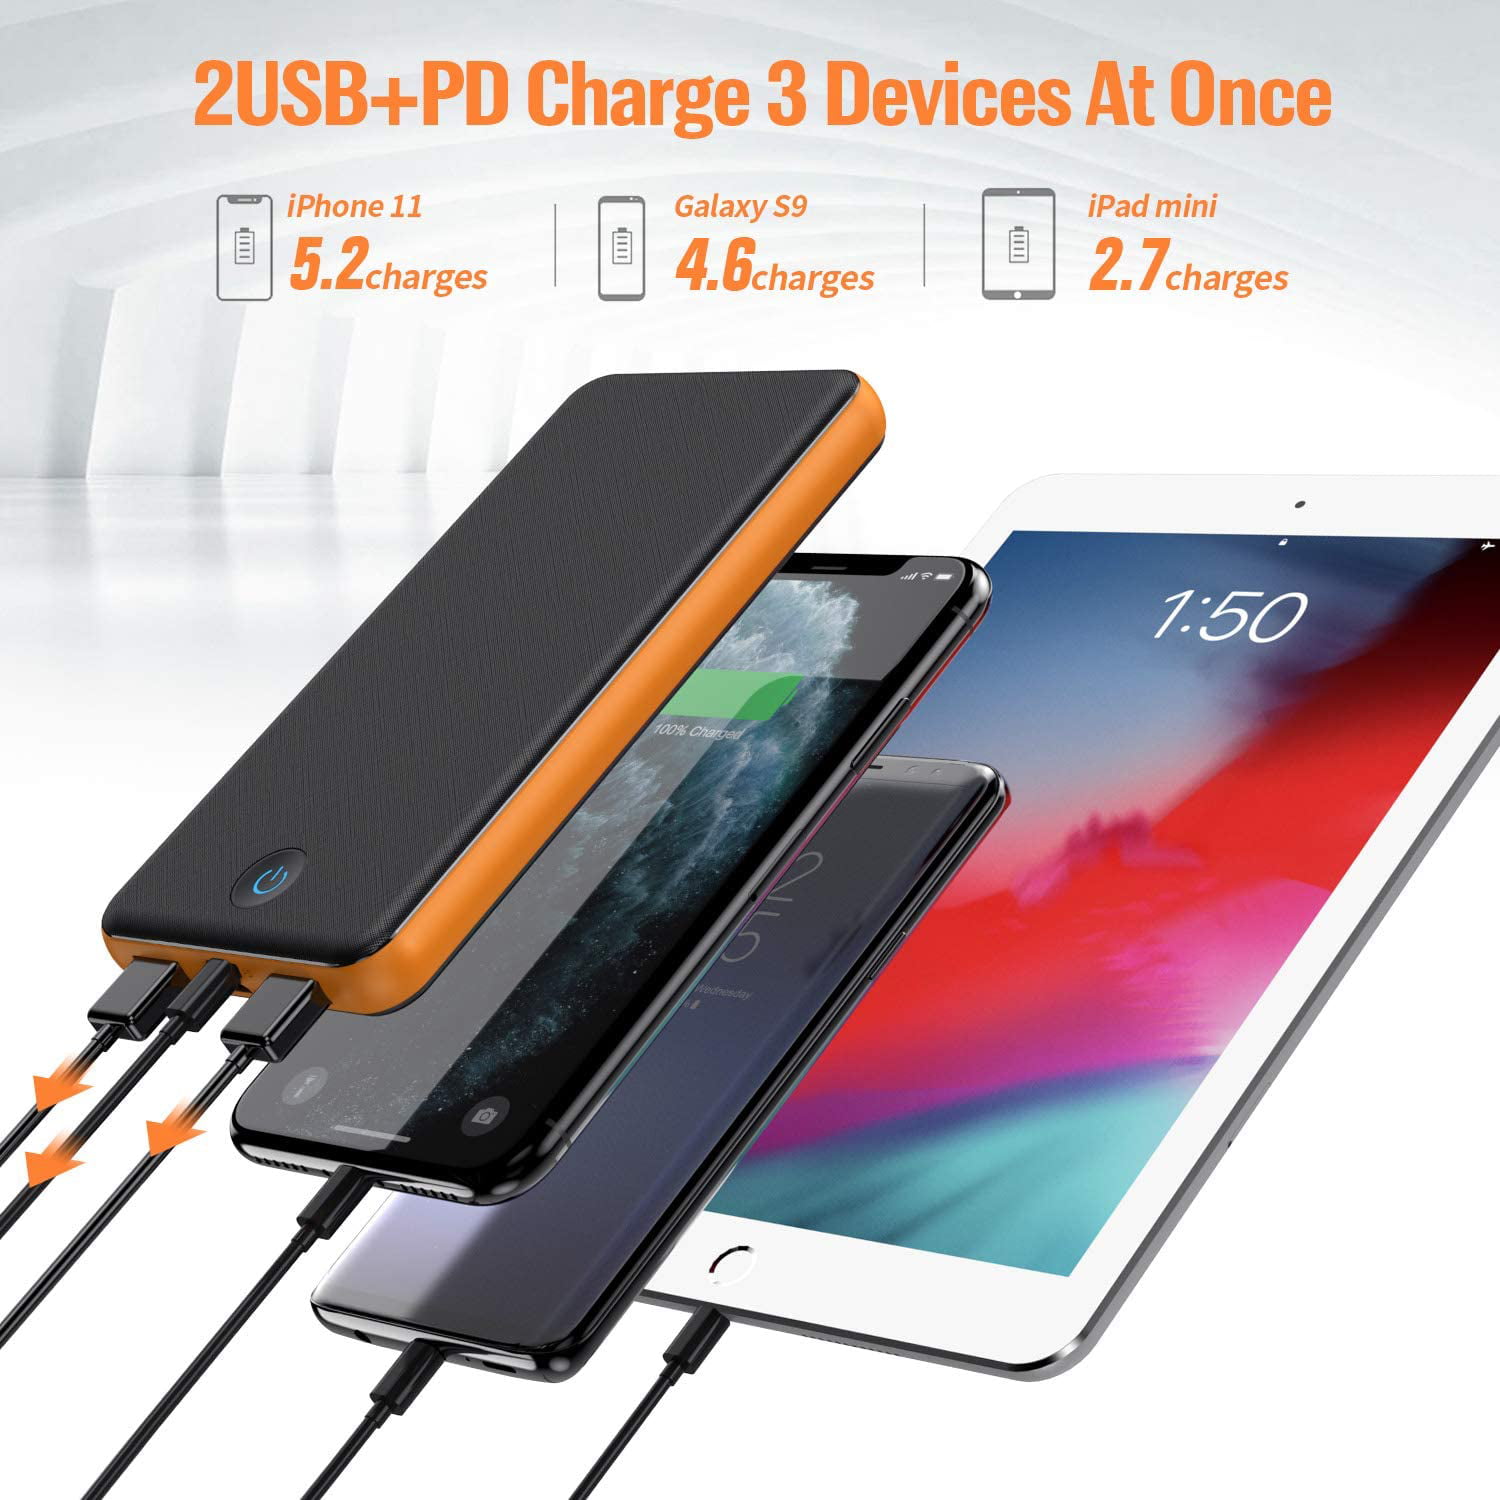 2 Inputs and 3 Outputs Cell Phone Charger for iPhone,Samsung,Android Phone Power Bank 26800mAh Portable Charger Huge Capacity External Battery Pack with Colorful LED Indicator 18W PD & QC 3.0 Quick Charging Type-C Input/Output Tablet & etc